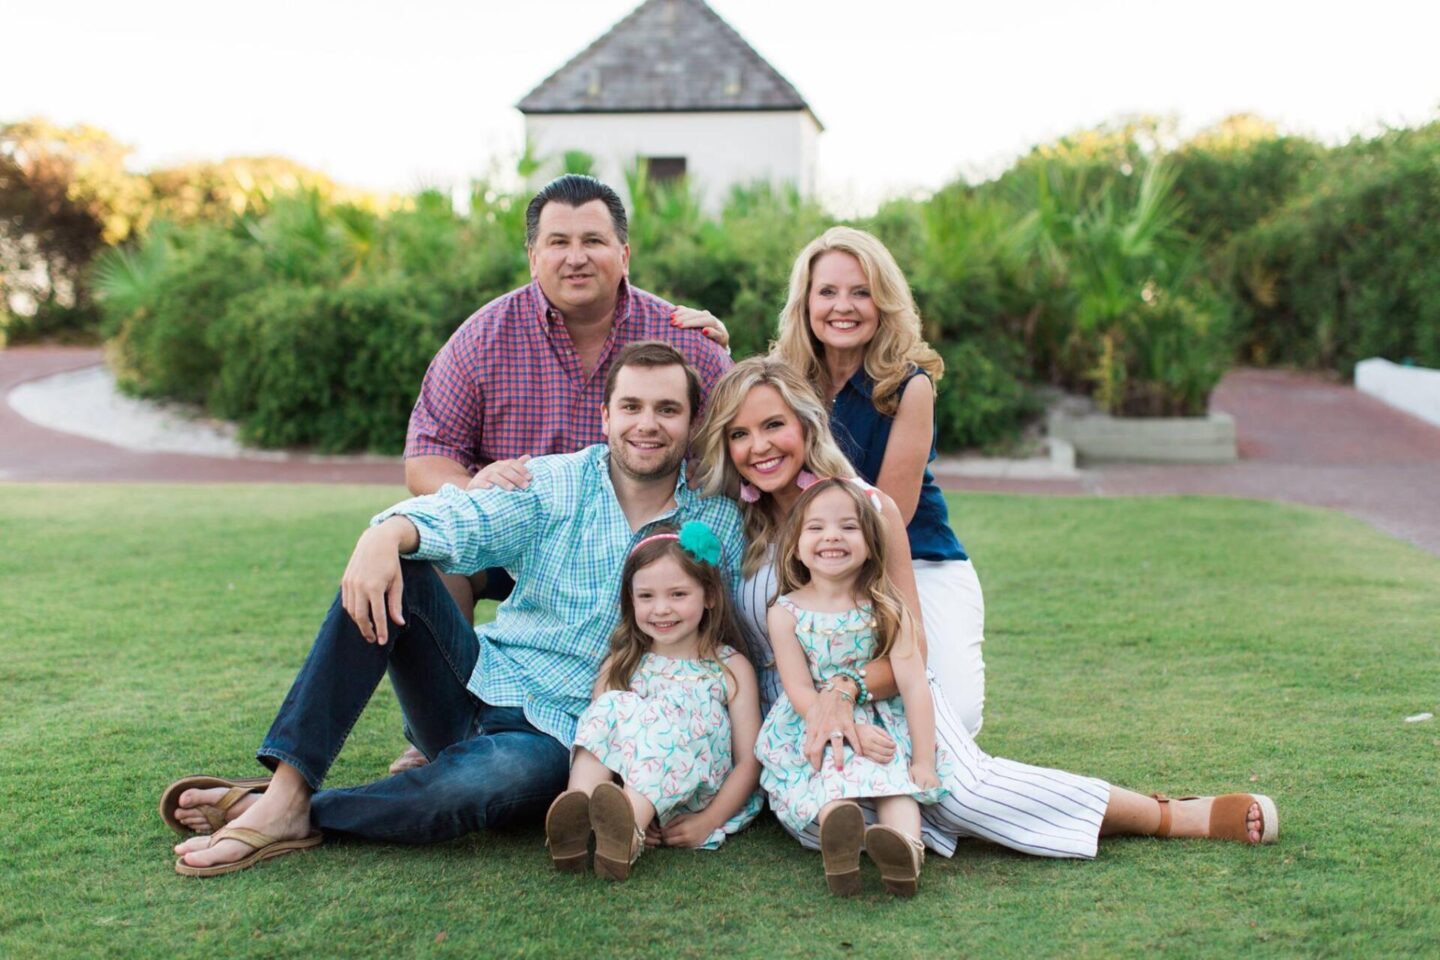 10 Year Wedding Anniversary by popular Nashville lifestyle blog, Hello Happiness: image of a family sitting together on the grass. 